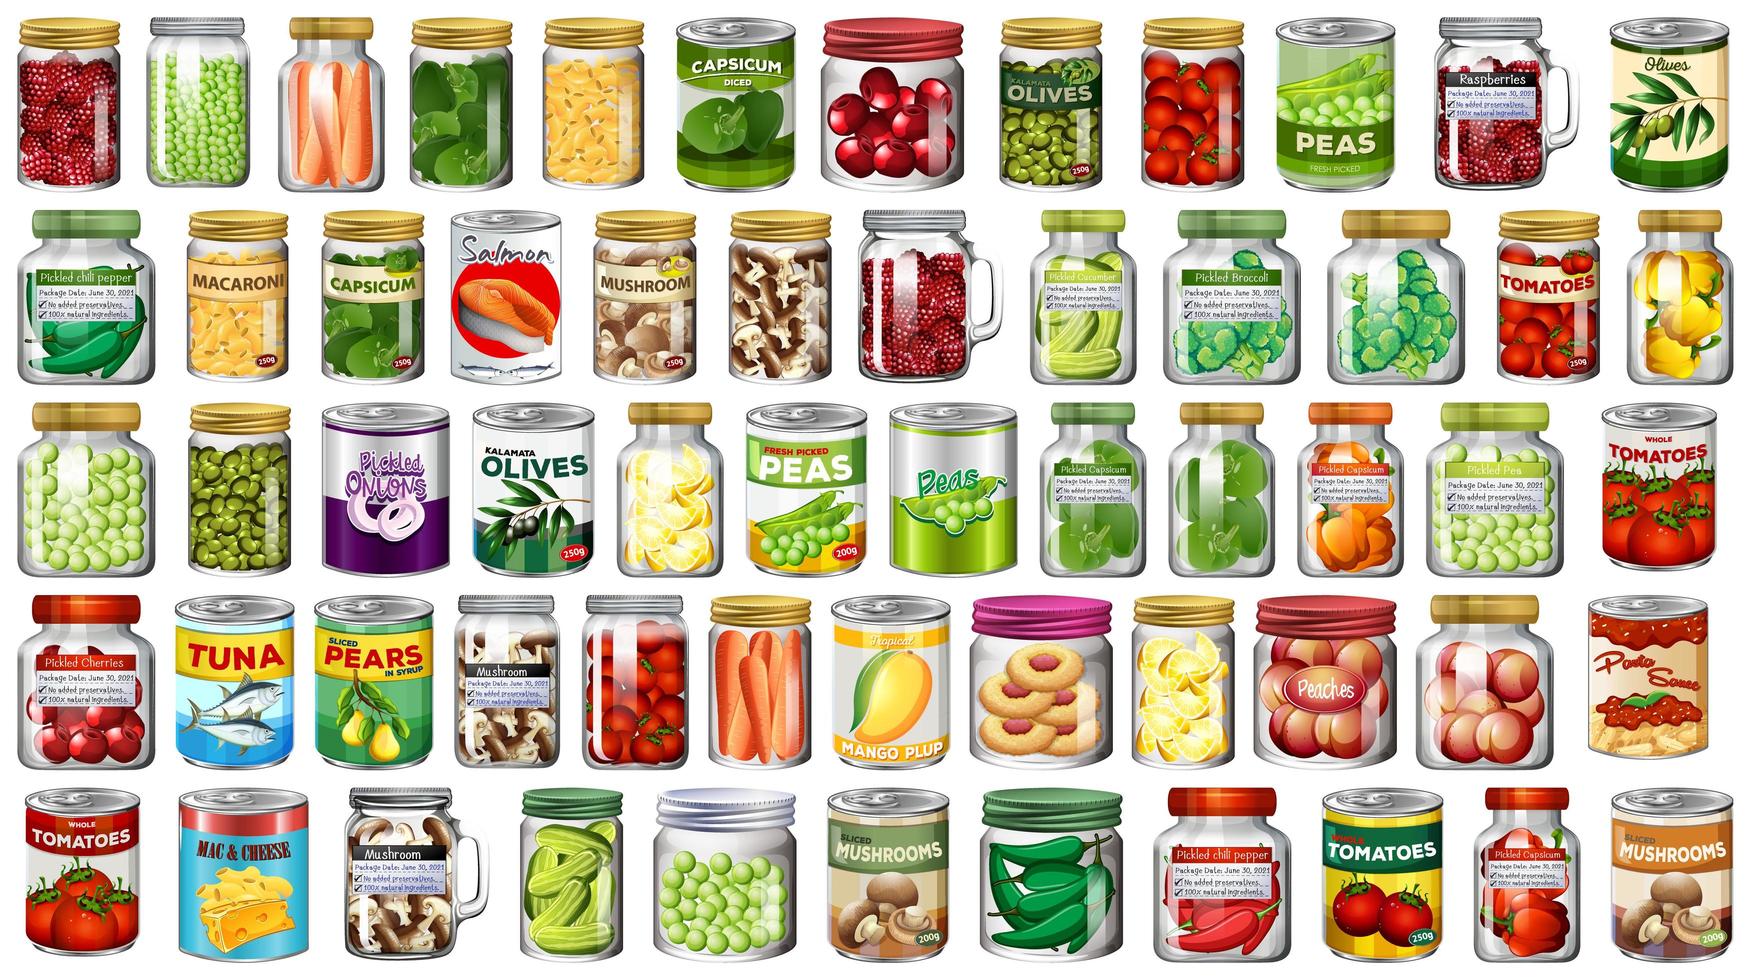 Food in cans and jars icon set  vector